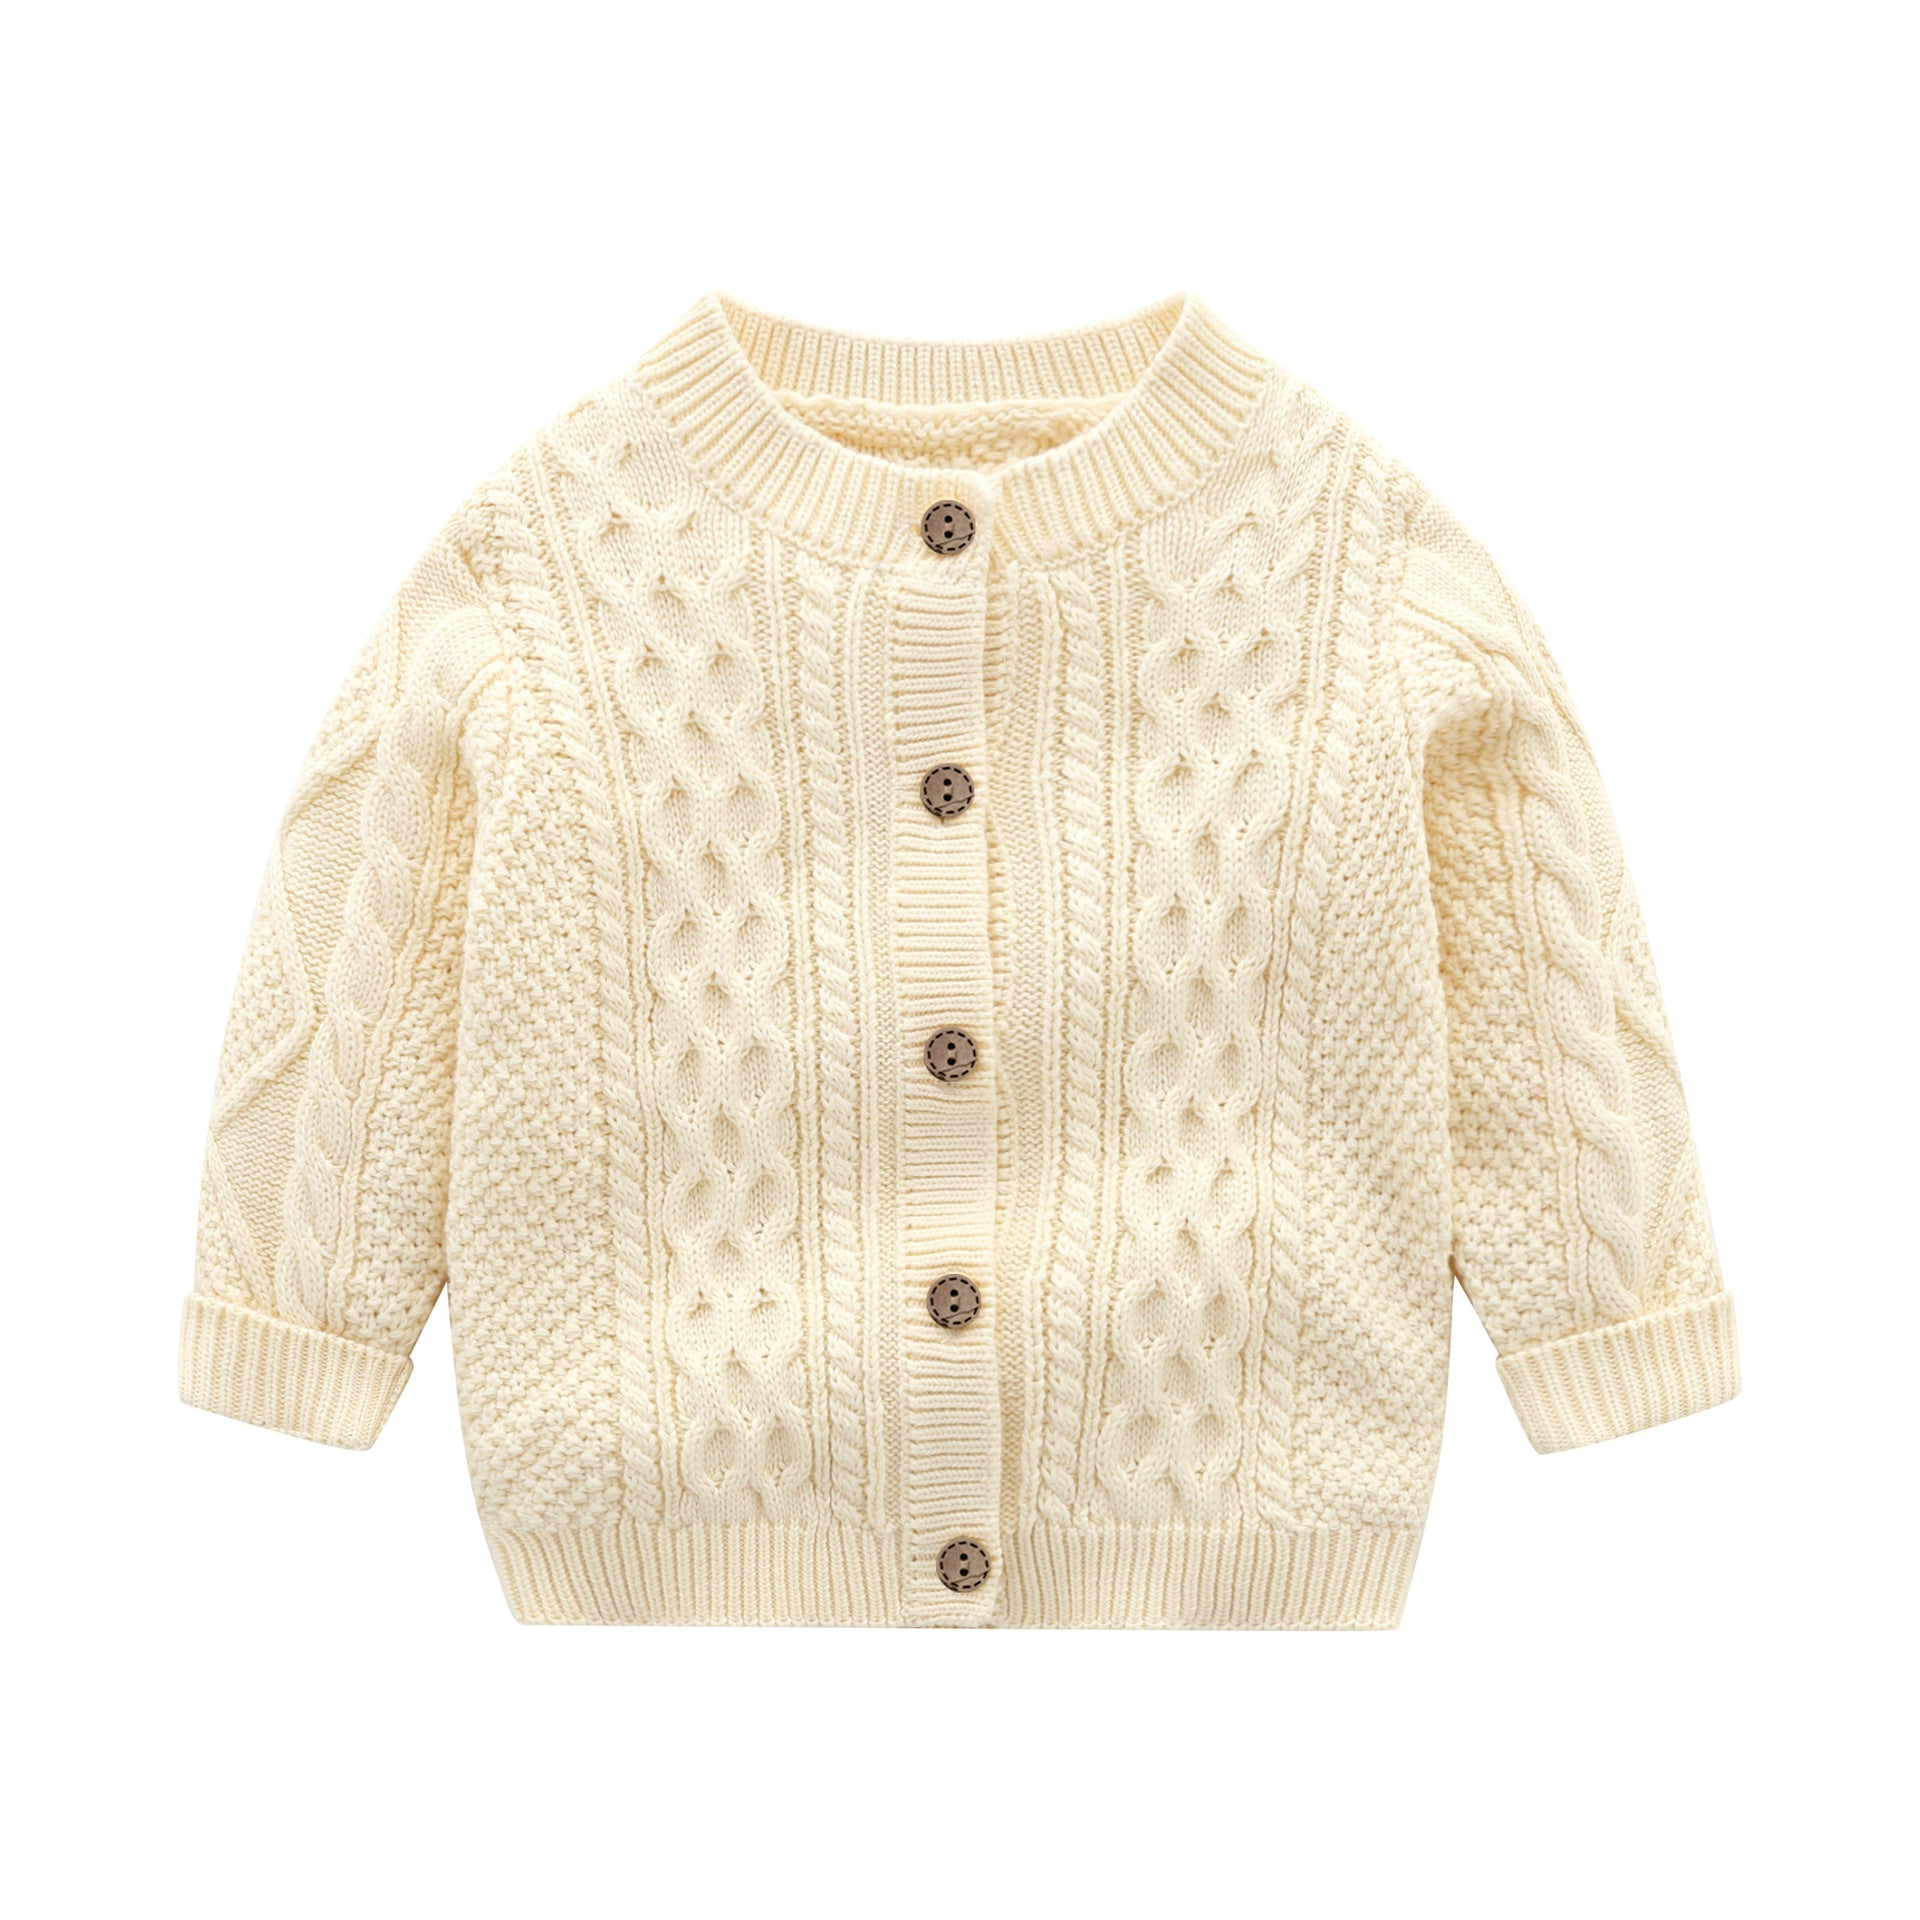 Baby Solid Color Crochet Knitted Pattern Single Breasted Design Sweater Cardigan My Kids-USA